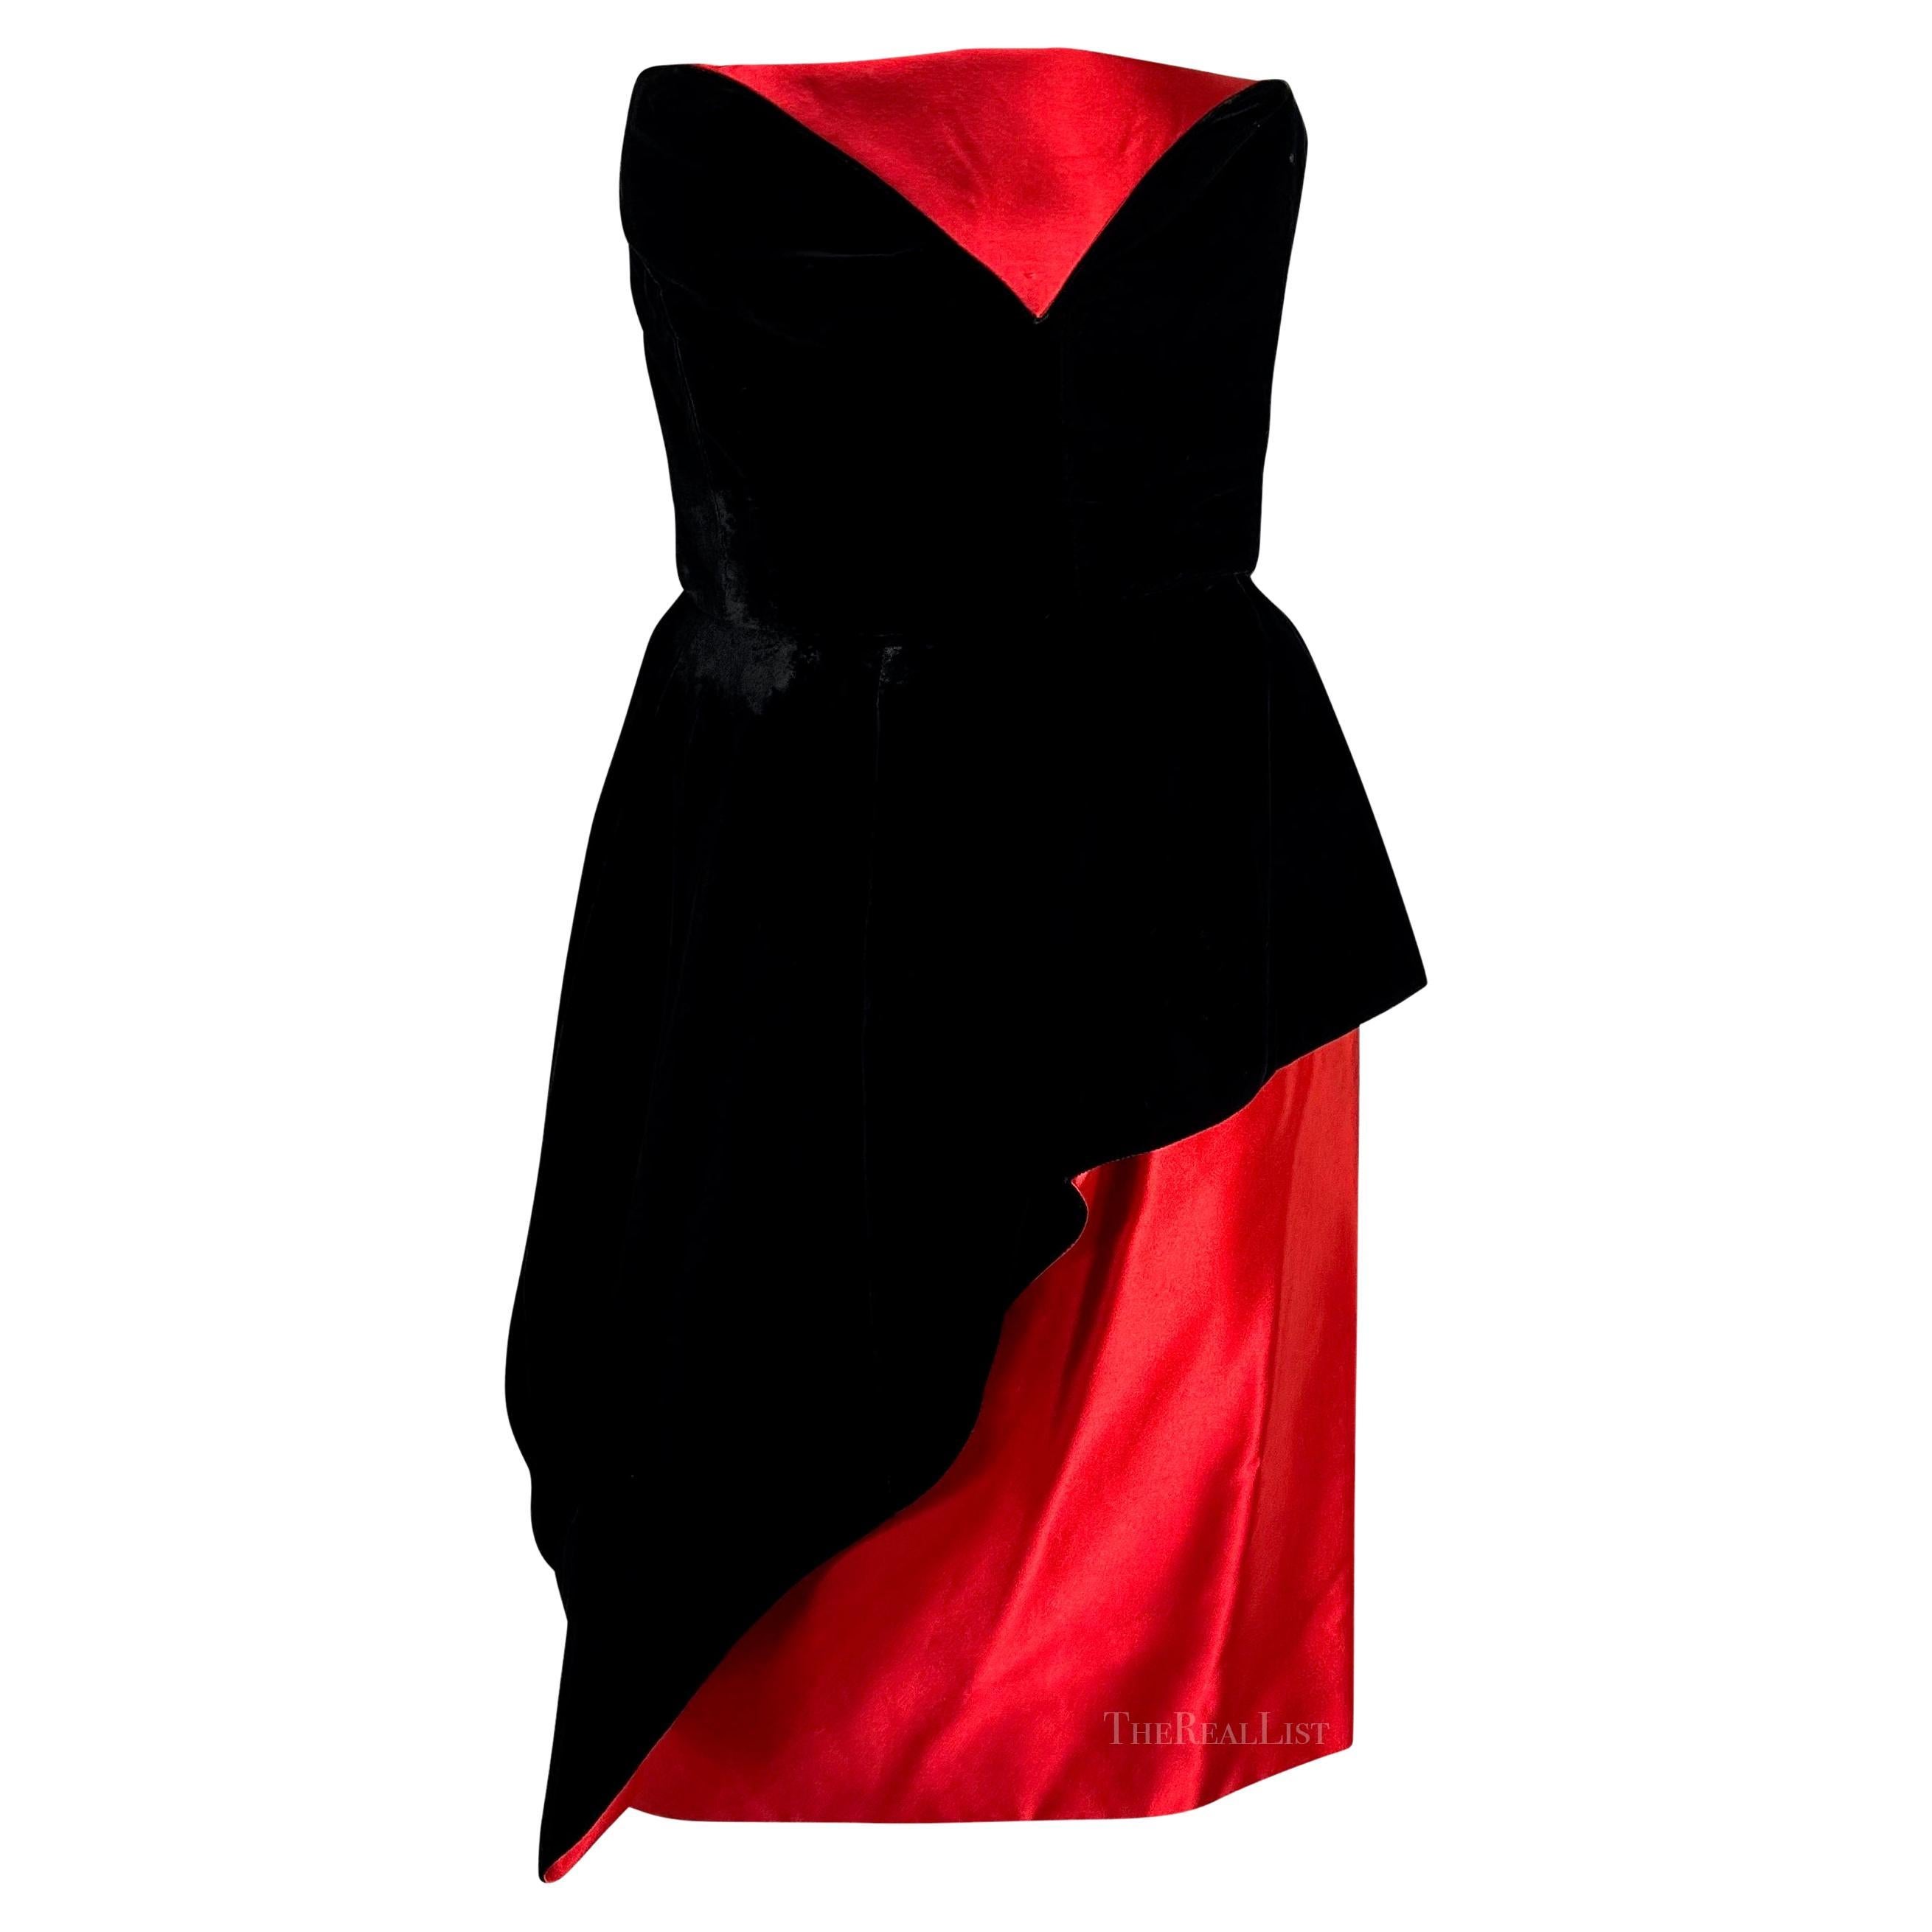 TheRealList presents: a fabulous black and red Lanvin mini dress. From the 1980s, this incredible mini dress is constructed of rich black velvet with a bright red silk satin lining that eclipses the red satin skirt. The top of the dress features a